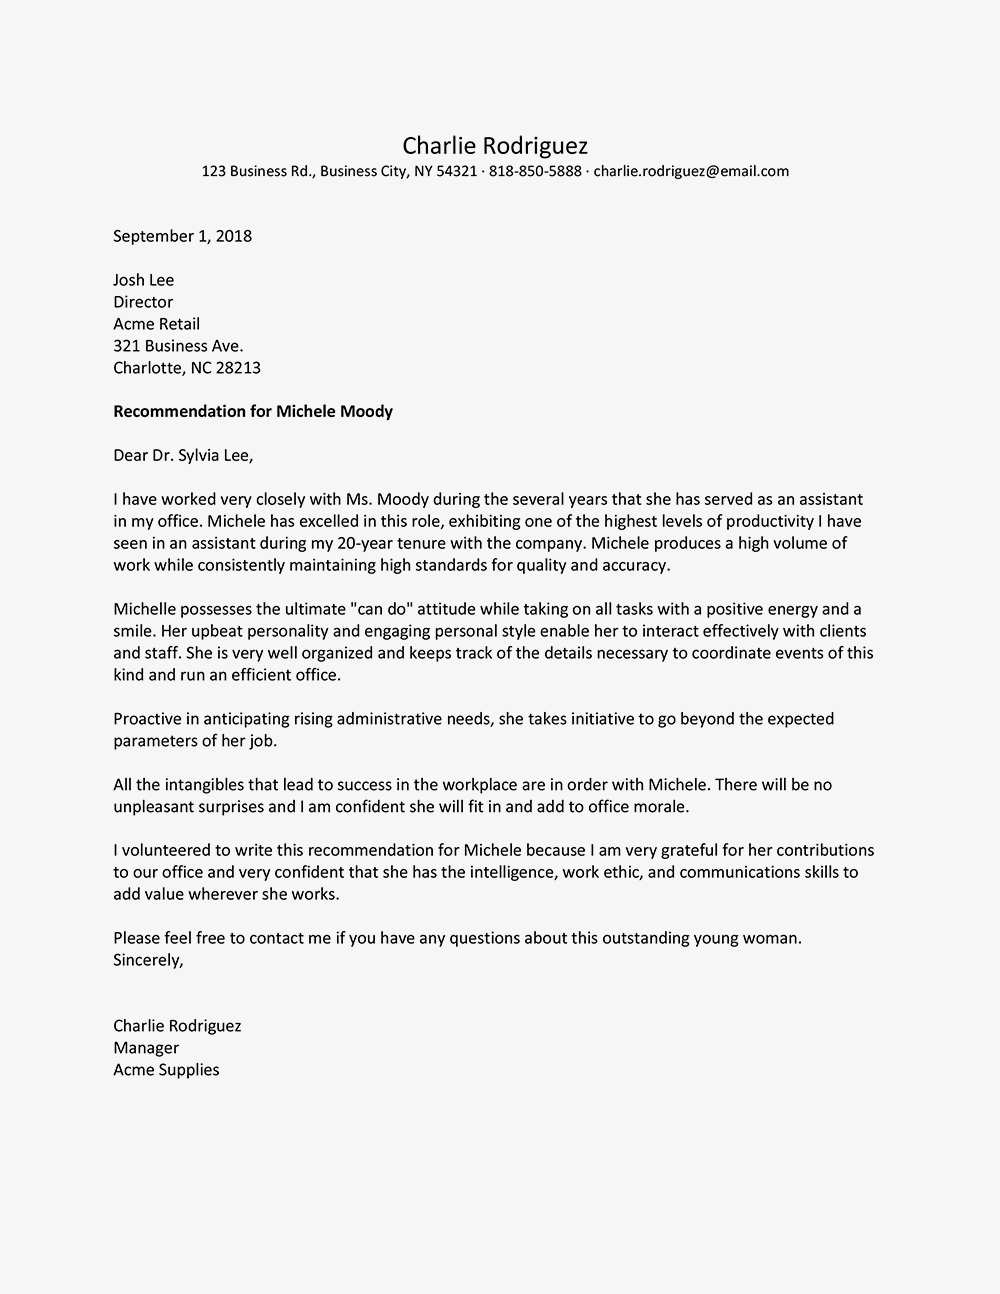 Letter Of Recommendation For Restaurant Manager Akali inside proportions 1000 X 1294